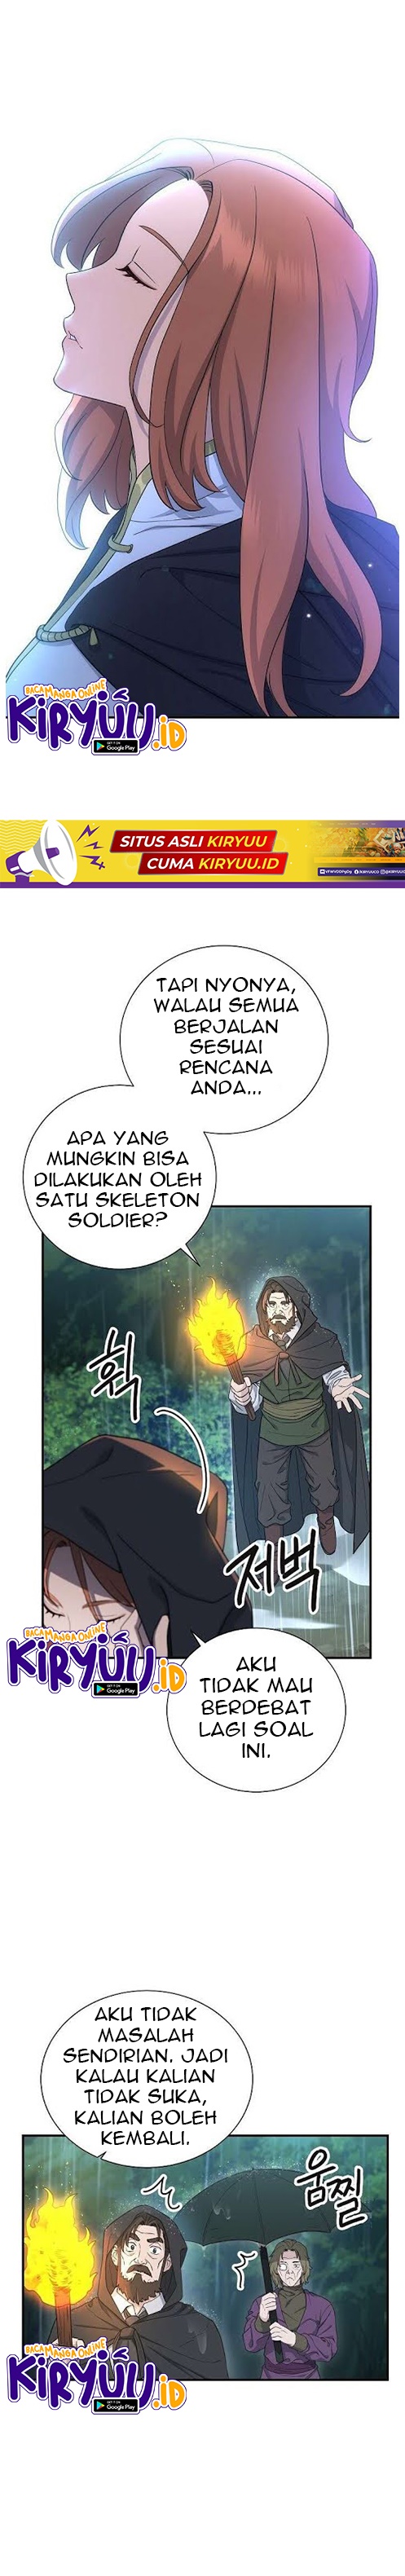 Skeleton Soldier Couldn’t Protect the Dungeon Chapter 142